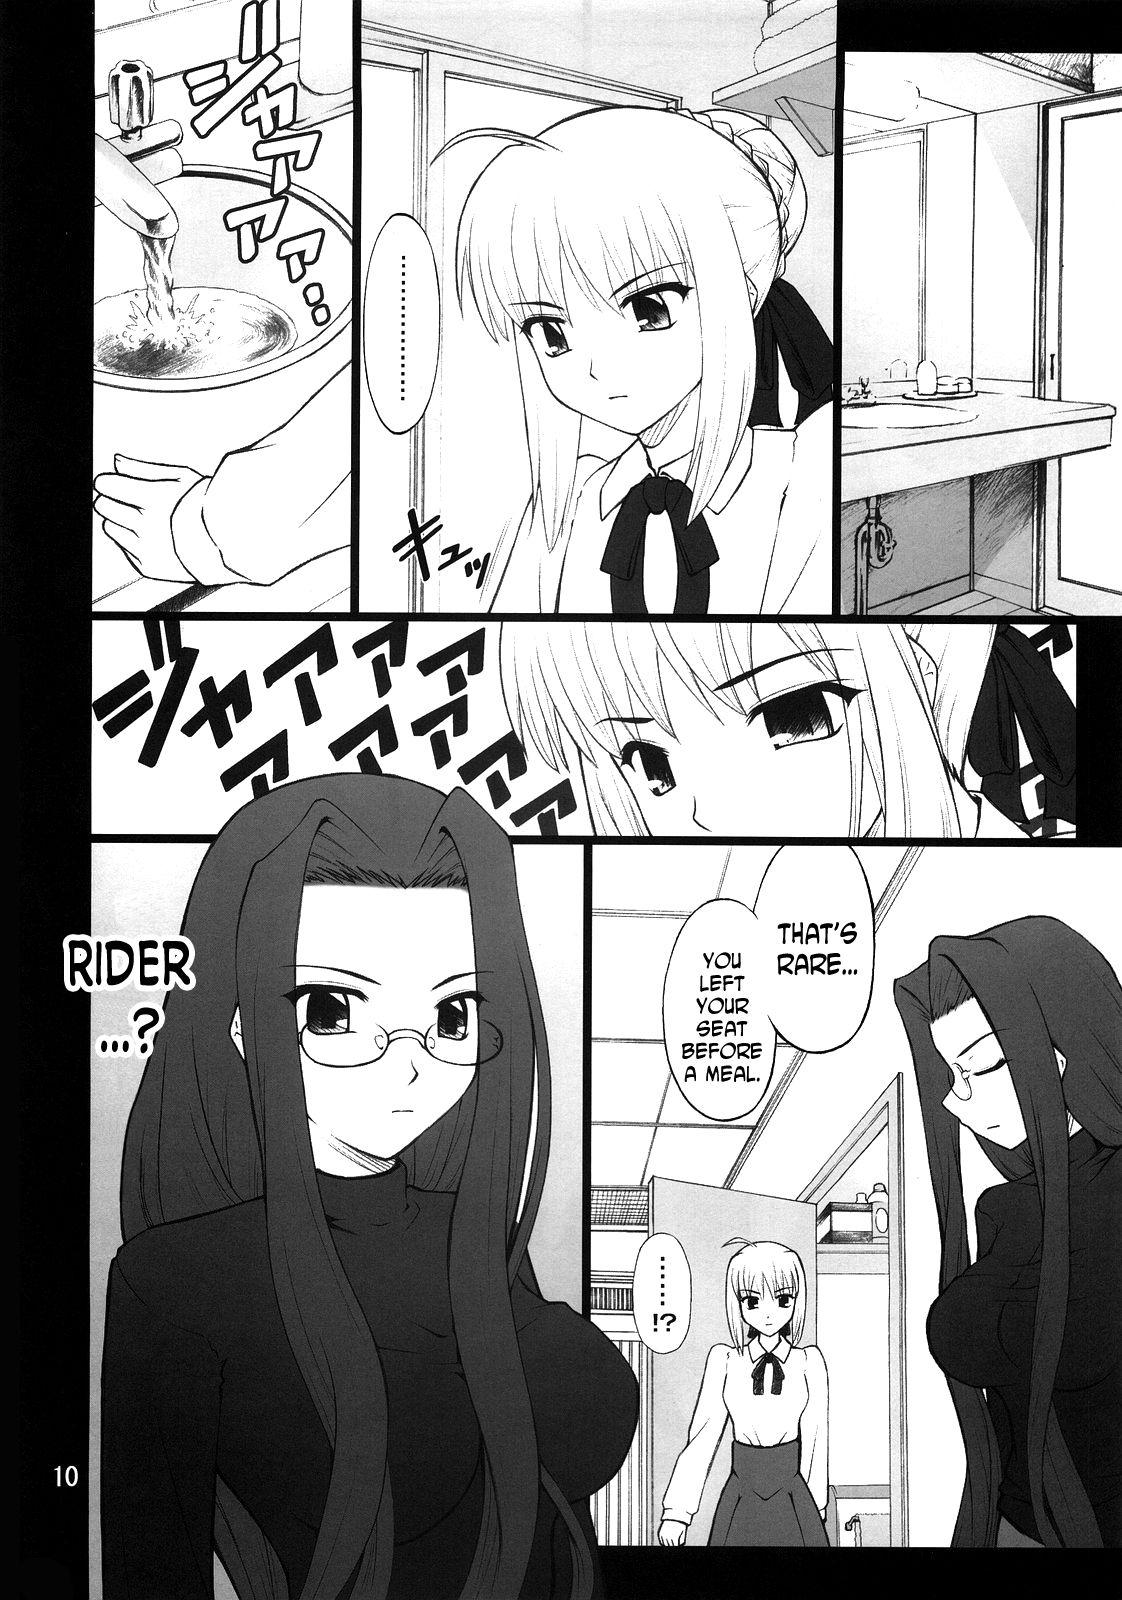 Young Tits Grem-Rin 2 - Fate stay night Big Dicks - Page 9